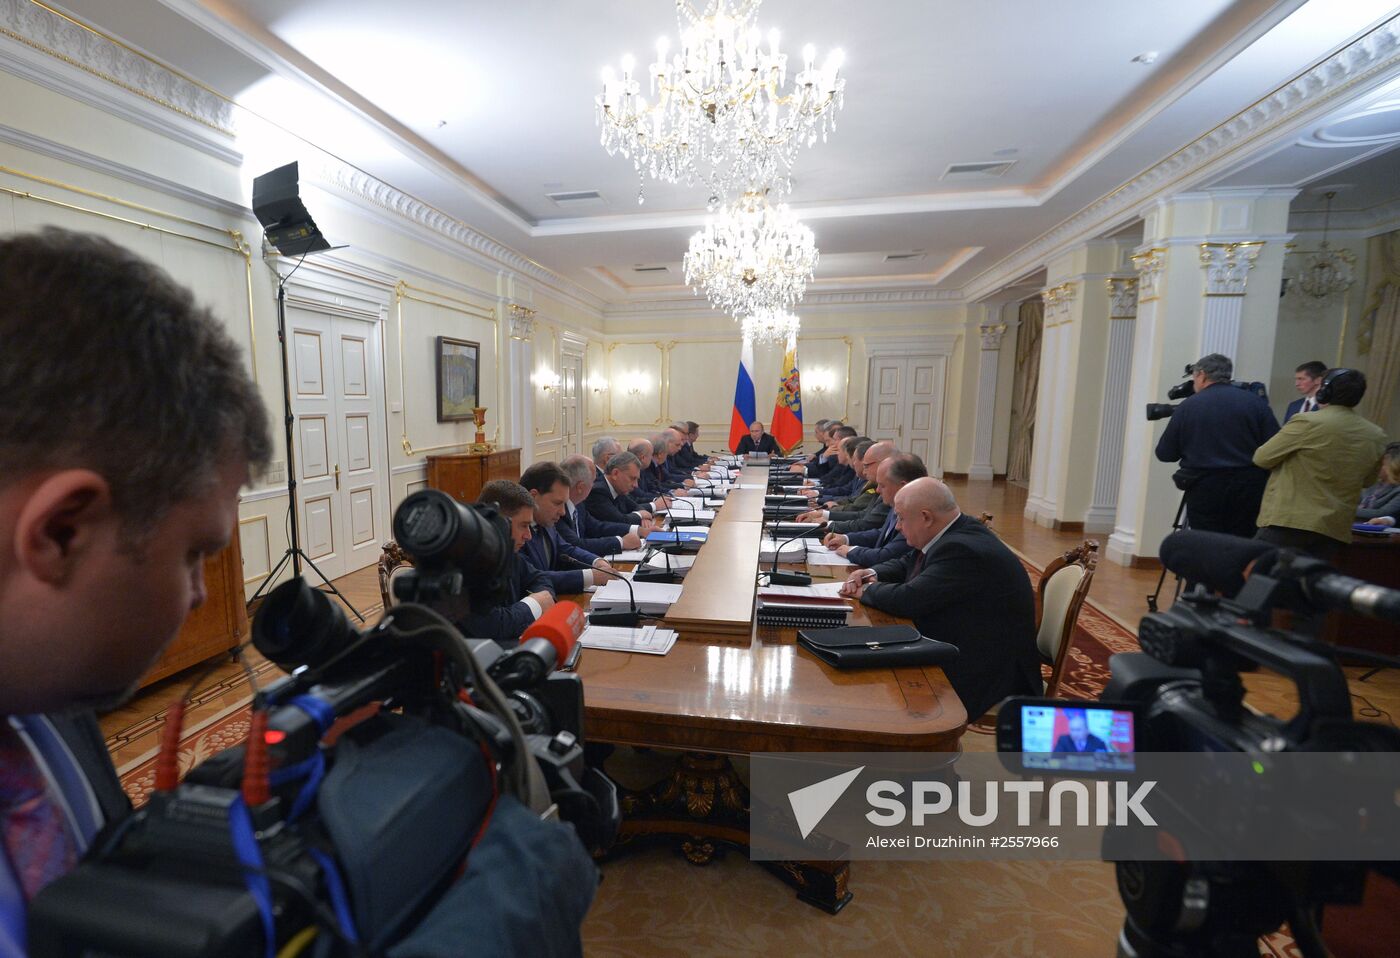 President Vladimir Putin conducts meeting of Commission for Military Technology